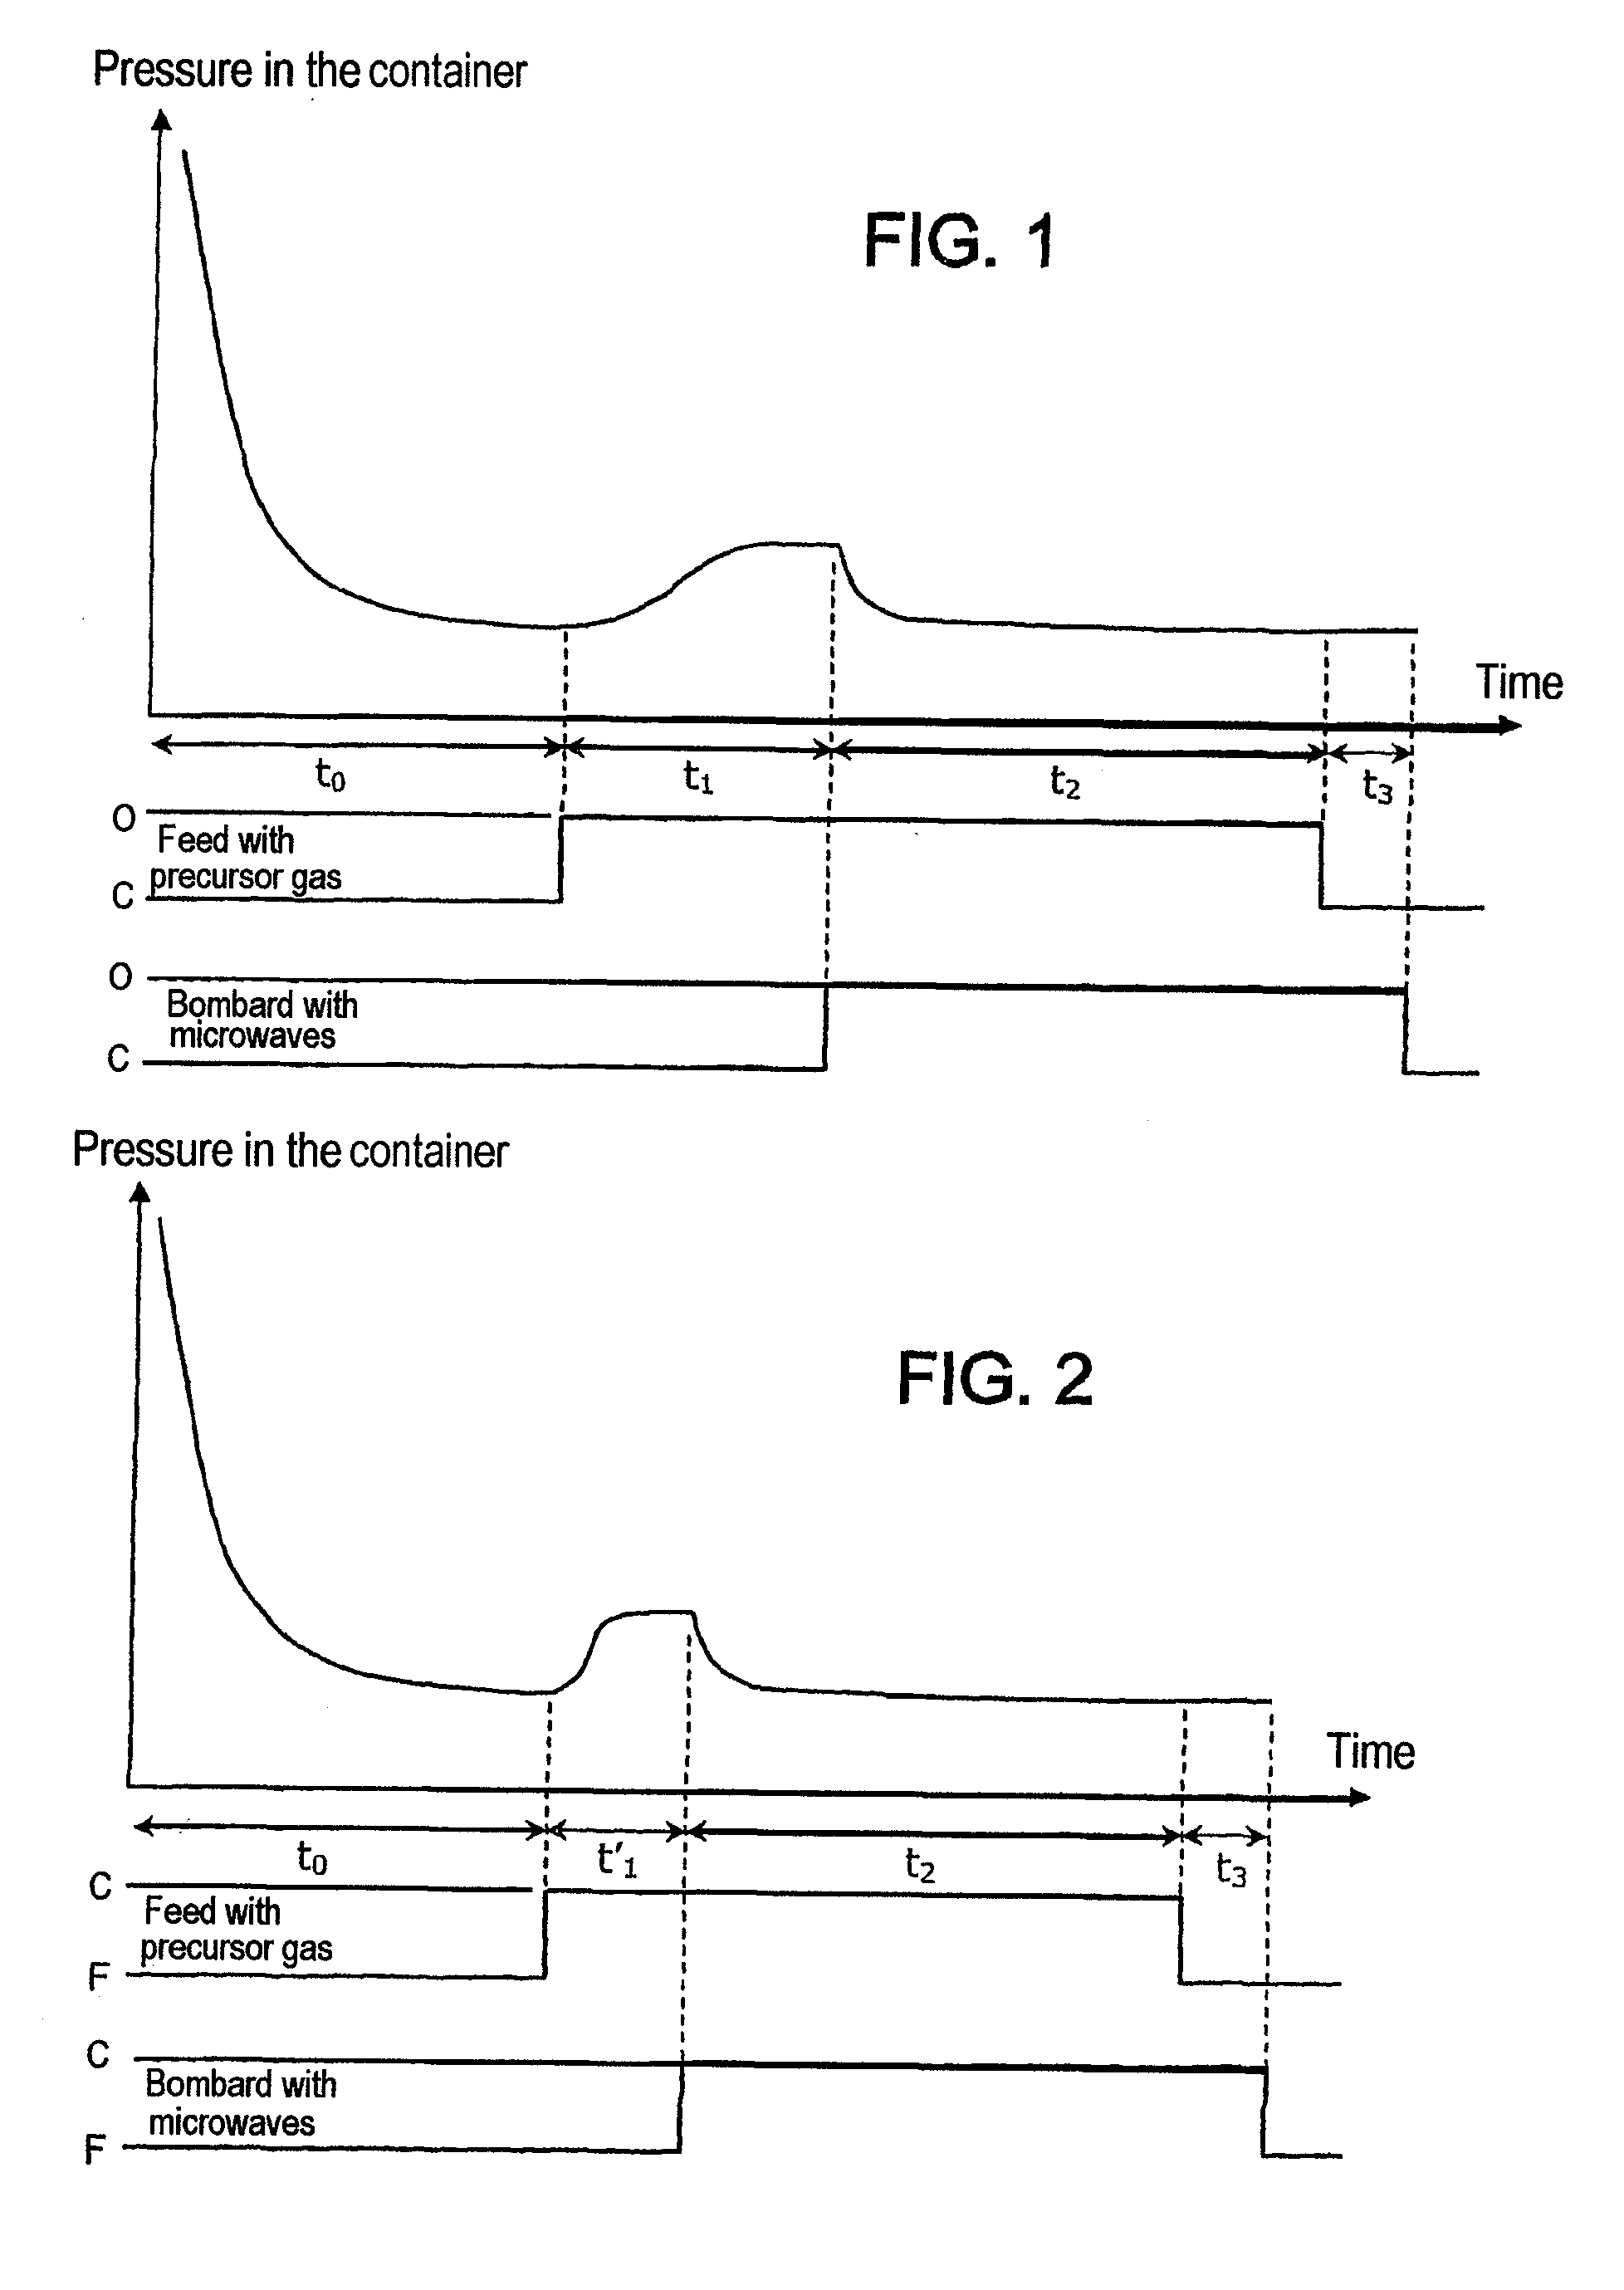 Apparatus for Plasma-Enhanced Chemical Vapor Deposition (Pecvd) of an Internal Barrier Layer Inside a Container, Said Apparatus Including a Gas Line Isolated by a Solenoid Valve